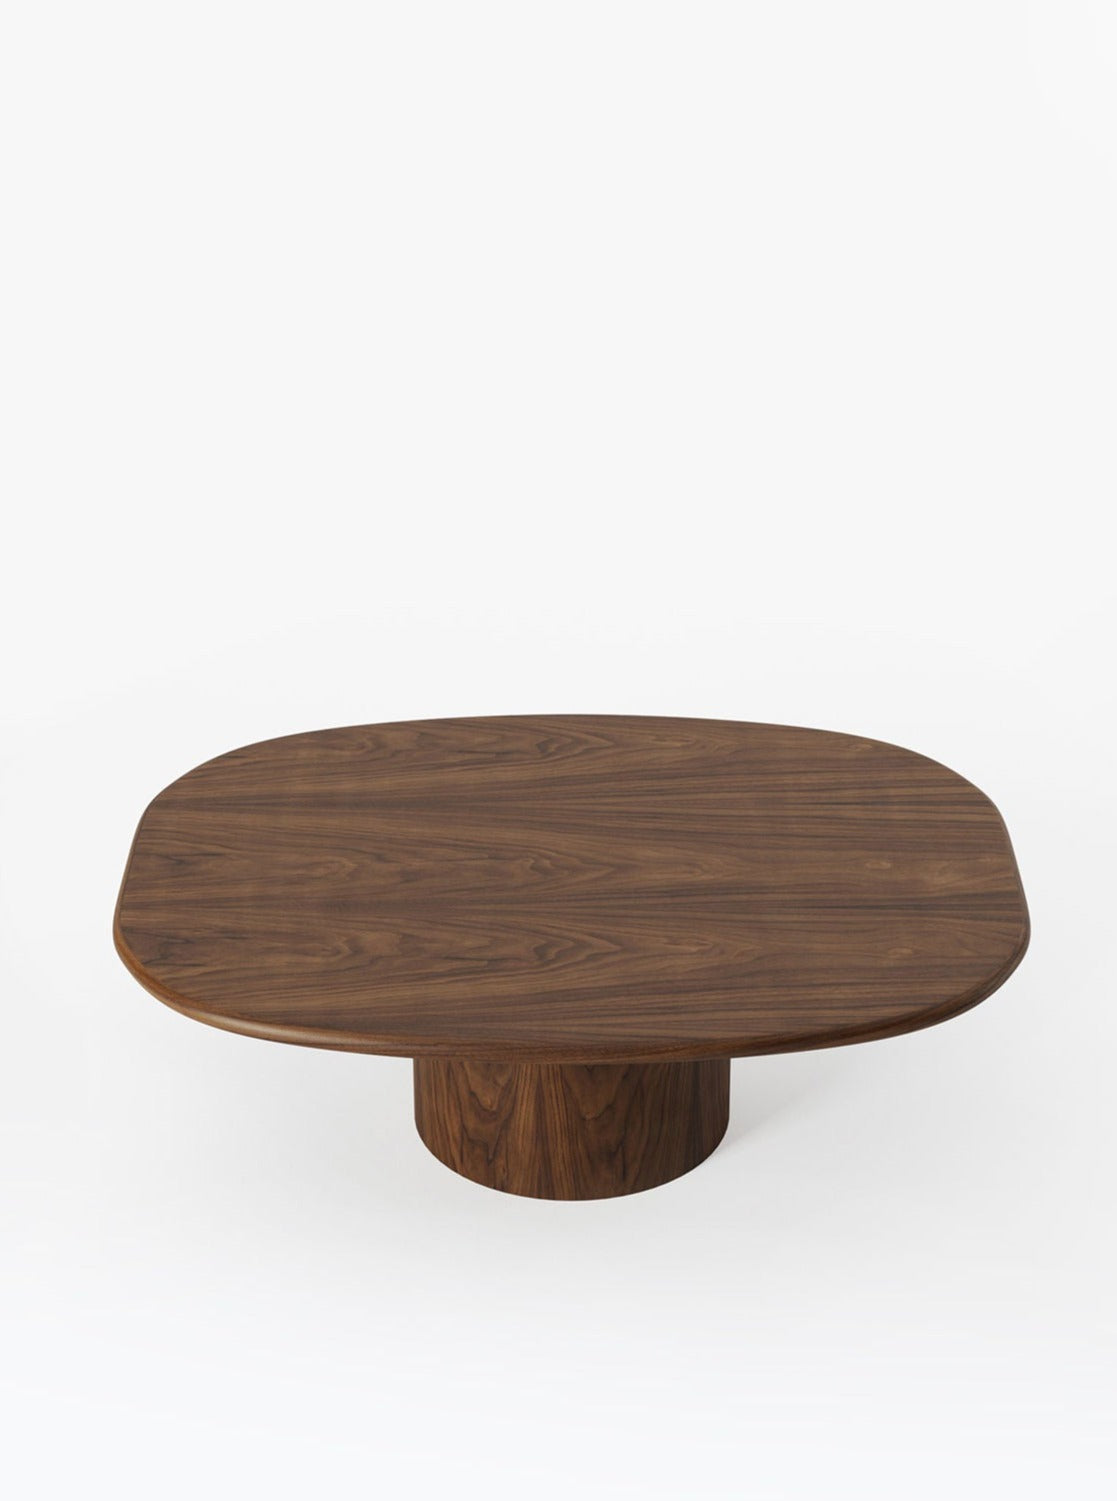 Functional and stylish Circa Coffee Table in Walnut with ample storage space